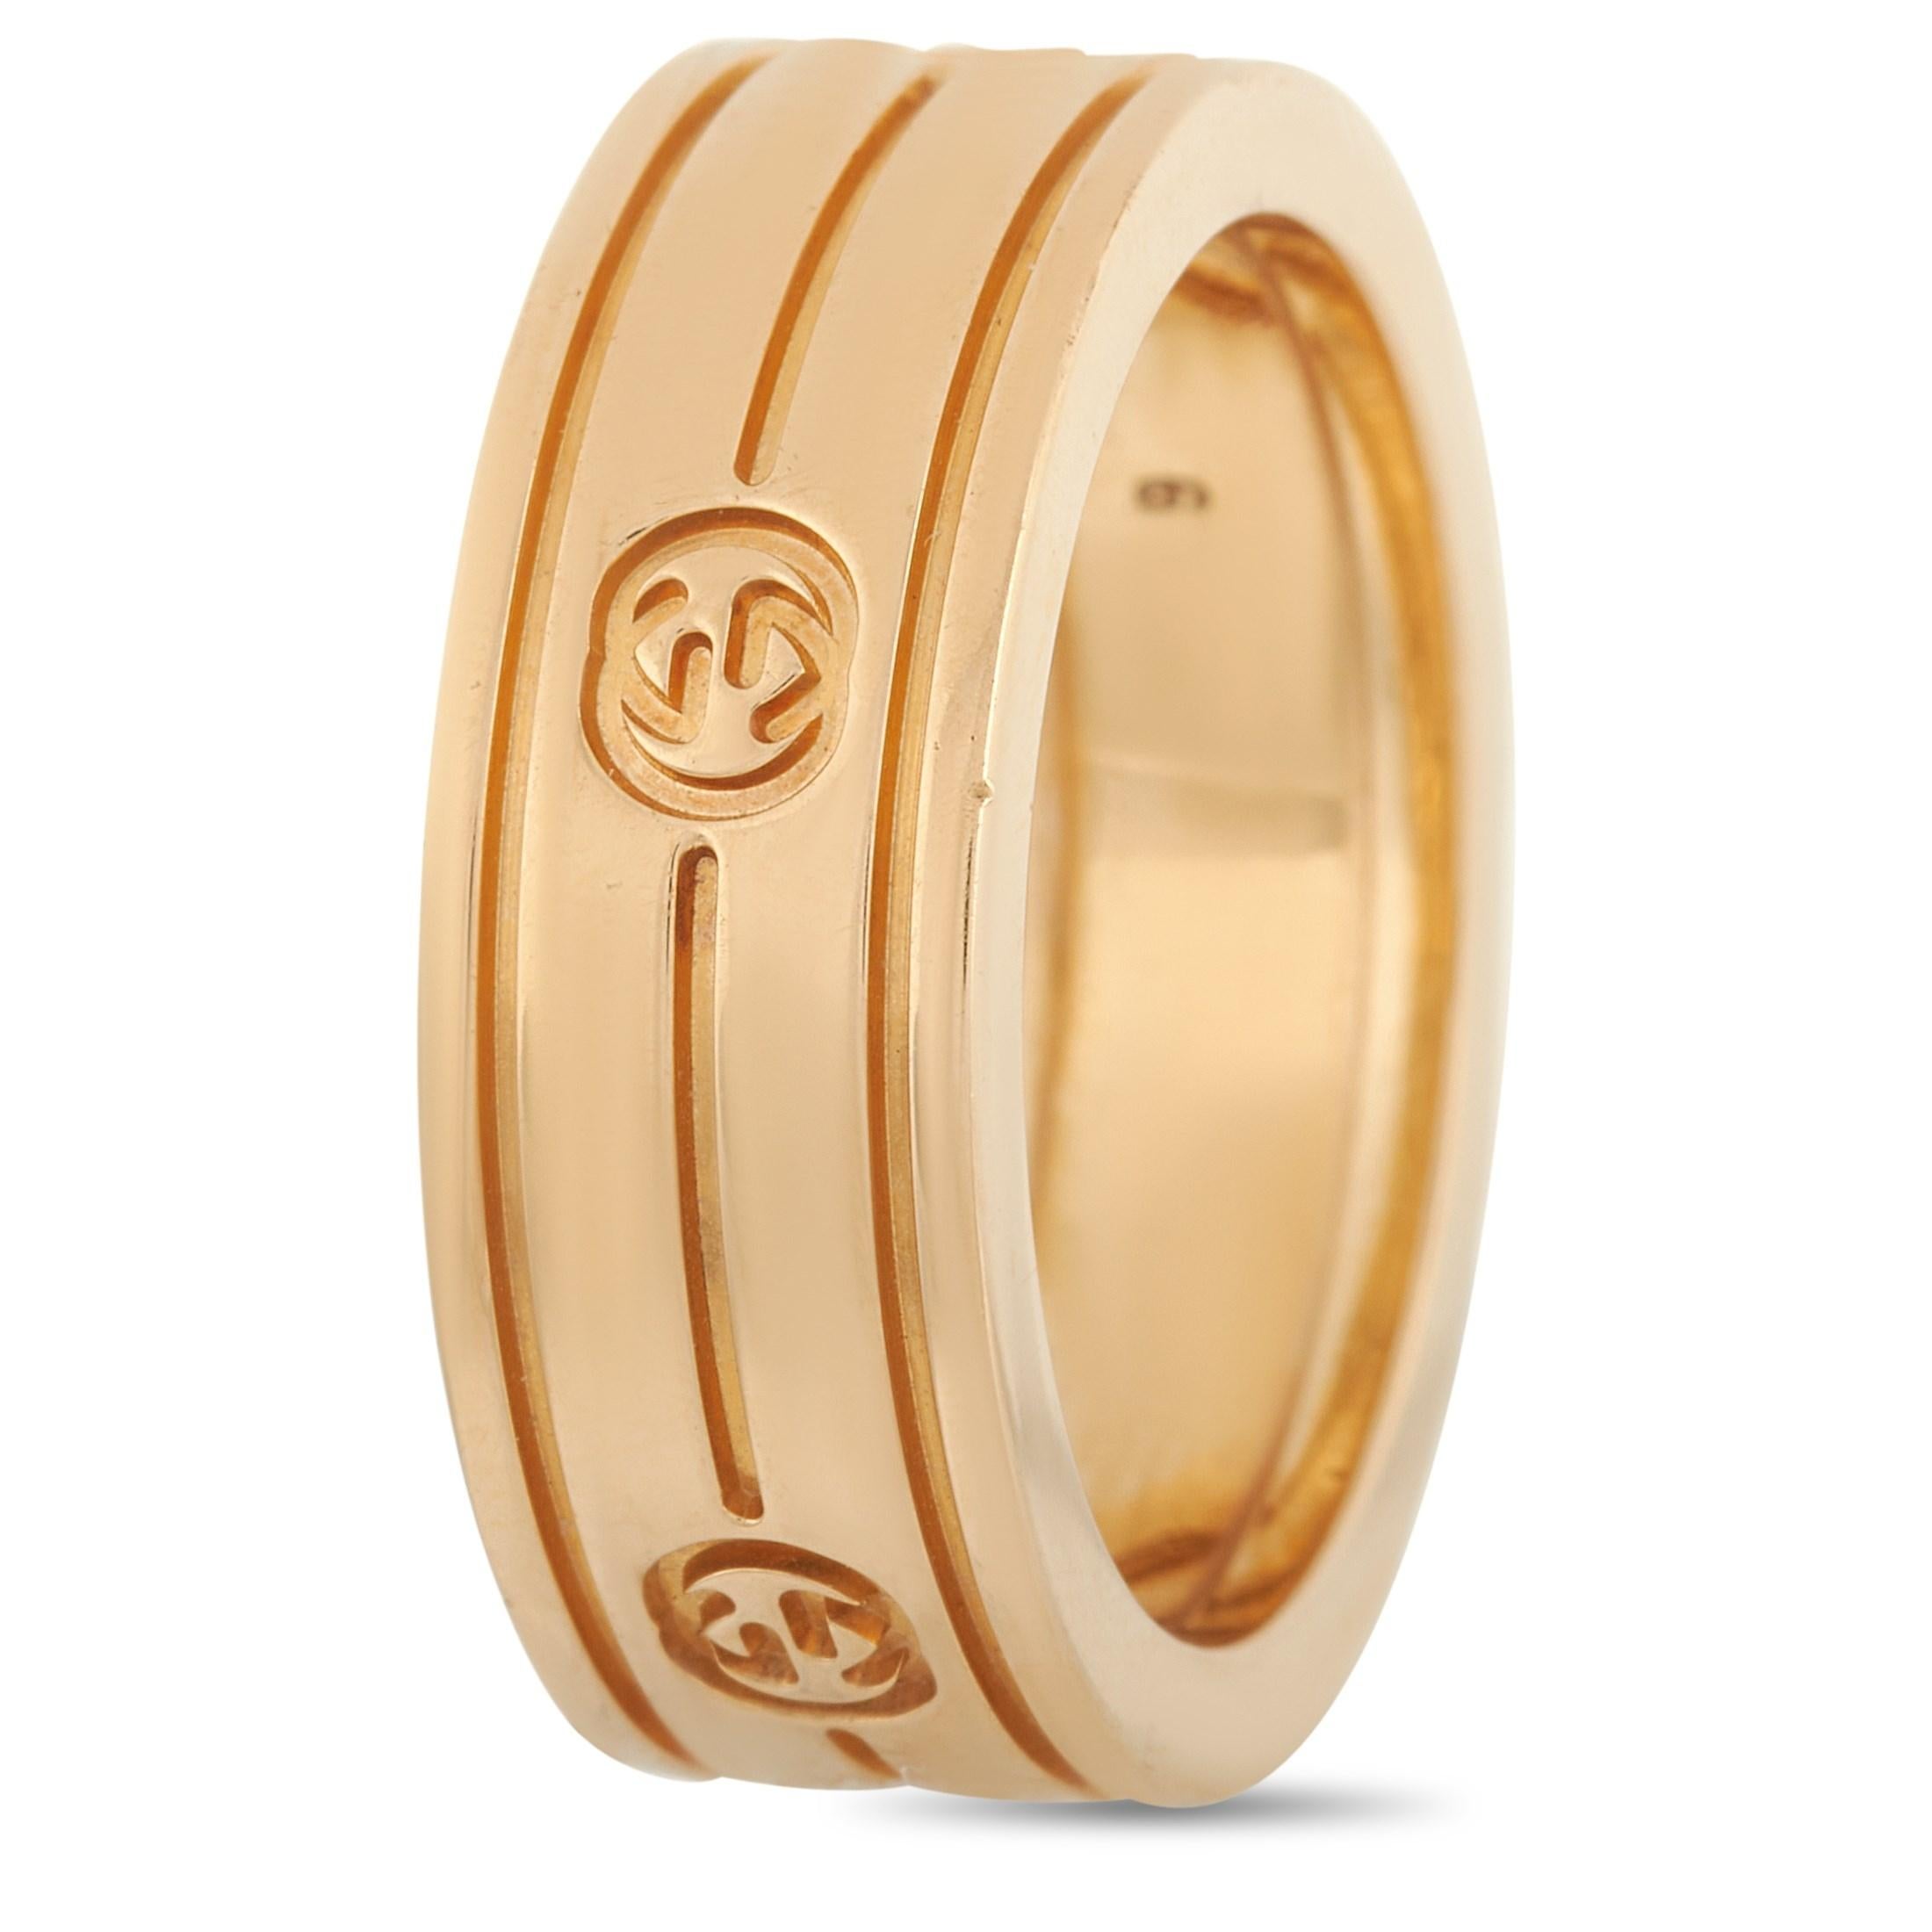 This Gucci 18K Yellow Gold Band Ring is a classy band full of Gucci style. The ring is made with 18K Yellow Gold and features the Gucci interlocking G logo throughout the band. The ring has a band thickness of 6 mm with a total weight of 7.9 grams.